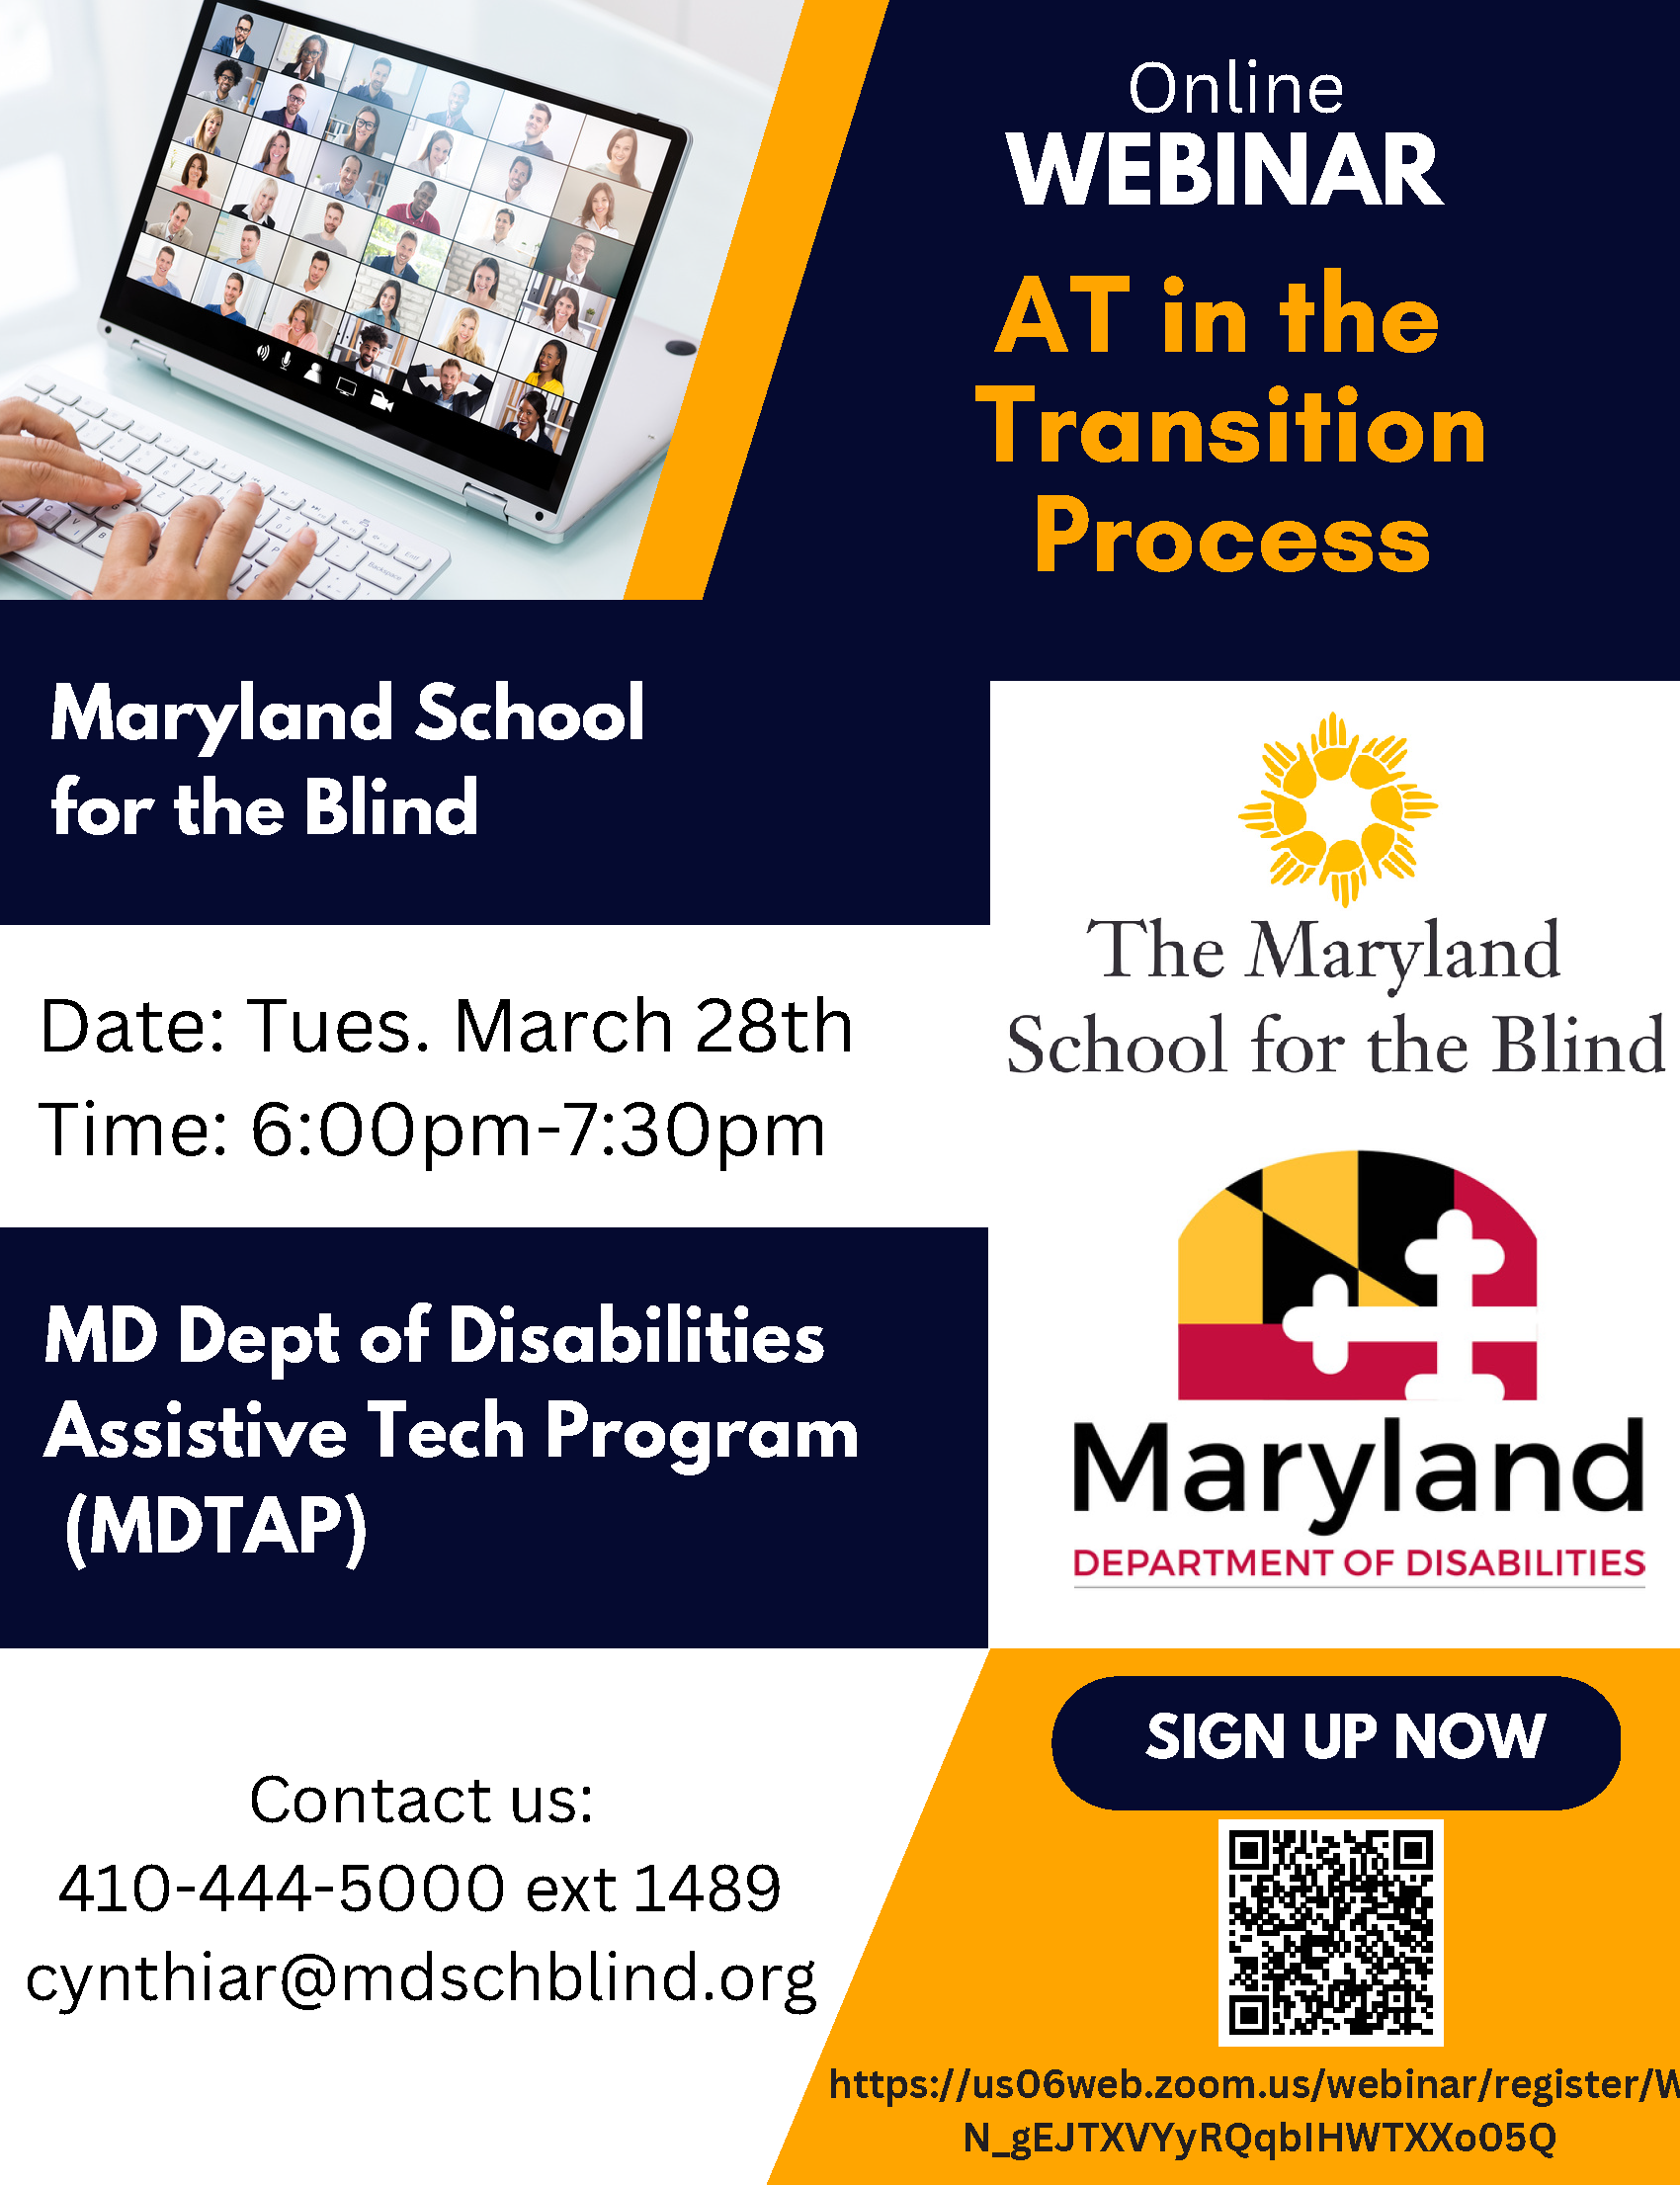 Join the Maryland School for the Blind and the Maryland Department of Disabilities Assistive Technology Program as we explore services & programs providing access to assistive technology (AT) during & after the transition from school to the community! Learn about the many AT services available through the Maryland AT Program. Questions? Contact Cynthia at cynthiar@mdschblind.org To register, use the zoom link provided below or the QR code on the flyer.